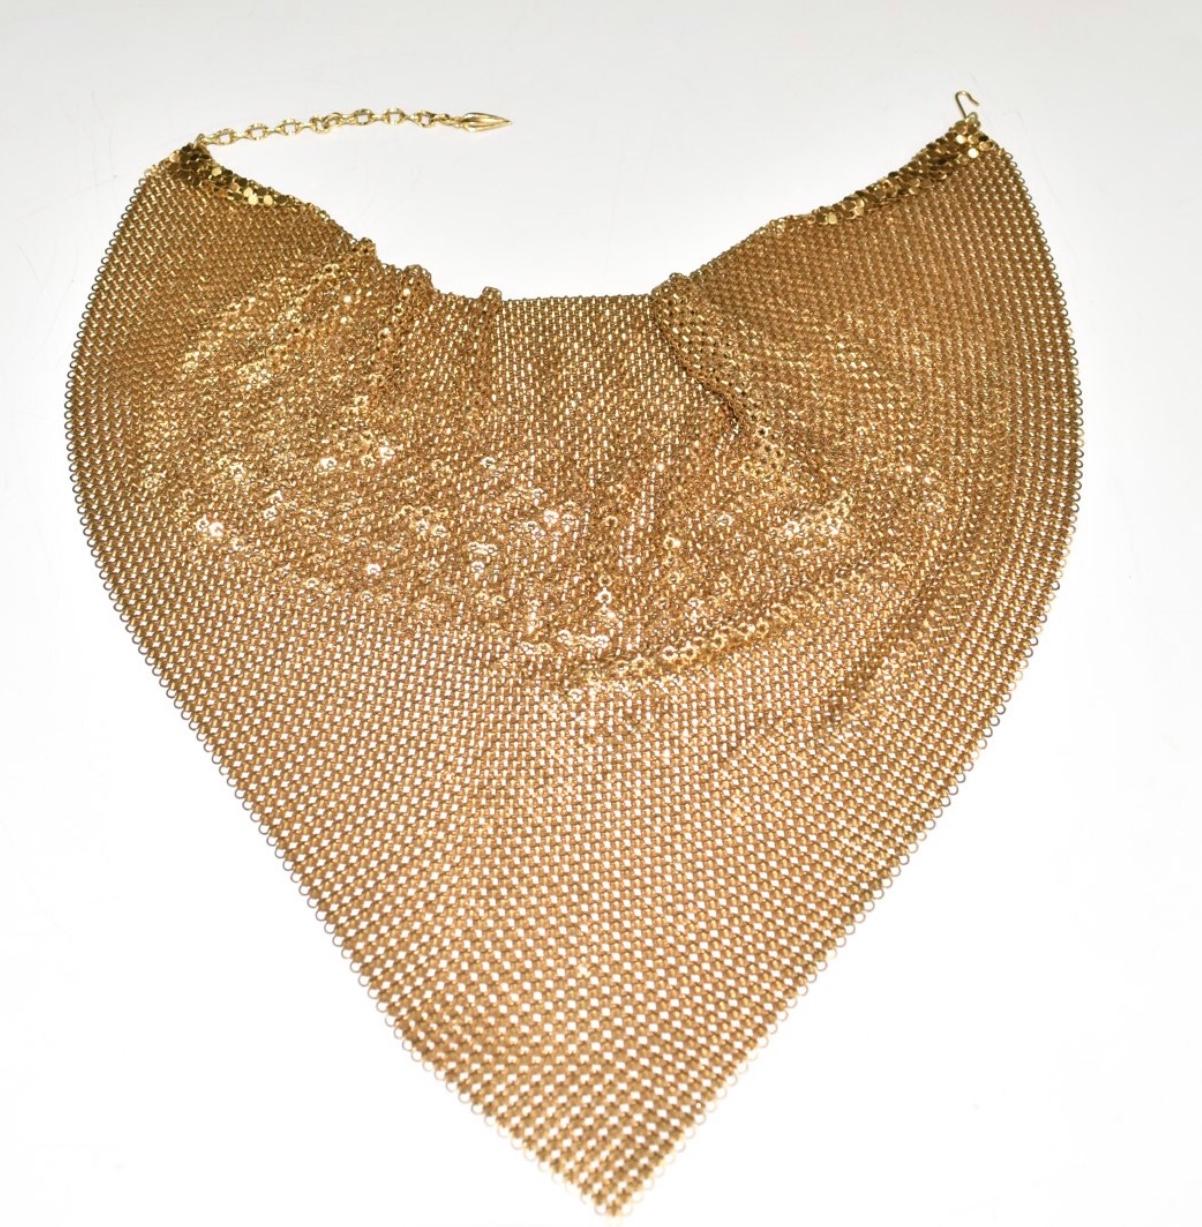 Classic Gold Chain Mail Bib Necklace by Designer Whiting and Davis For Sale 1